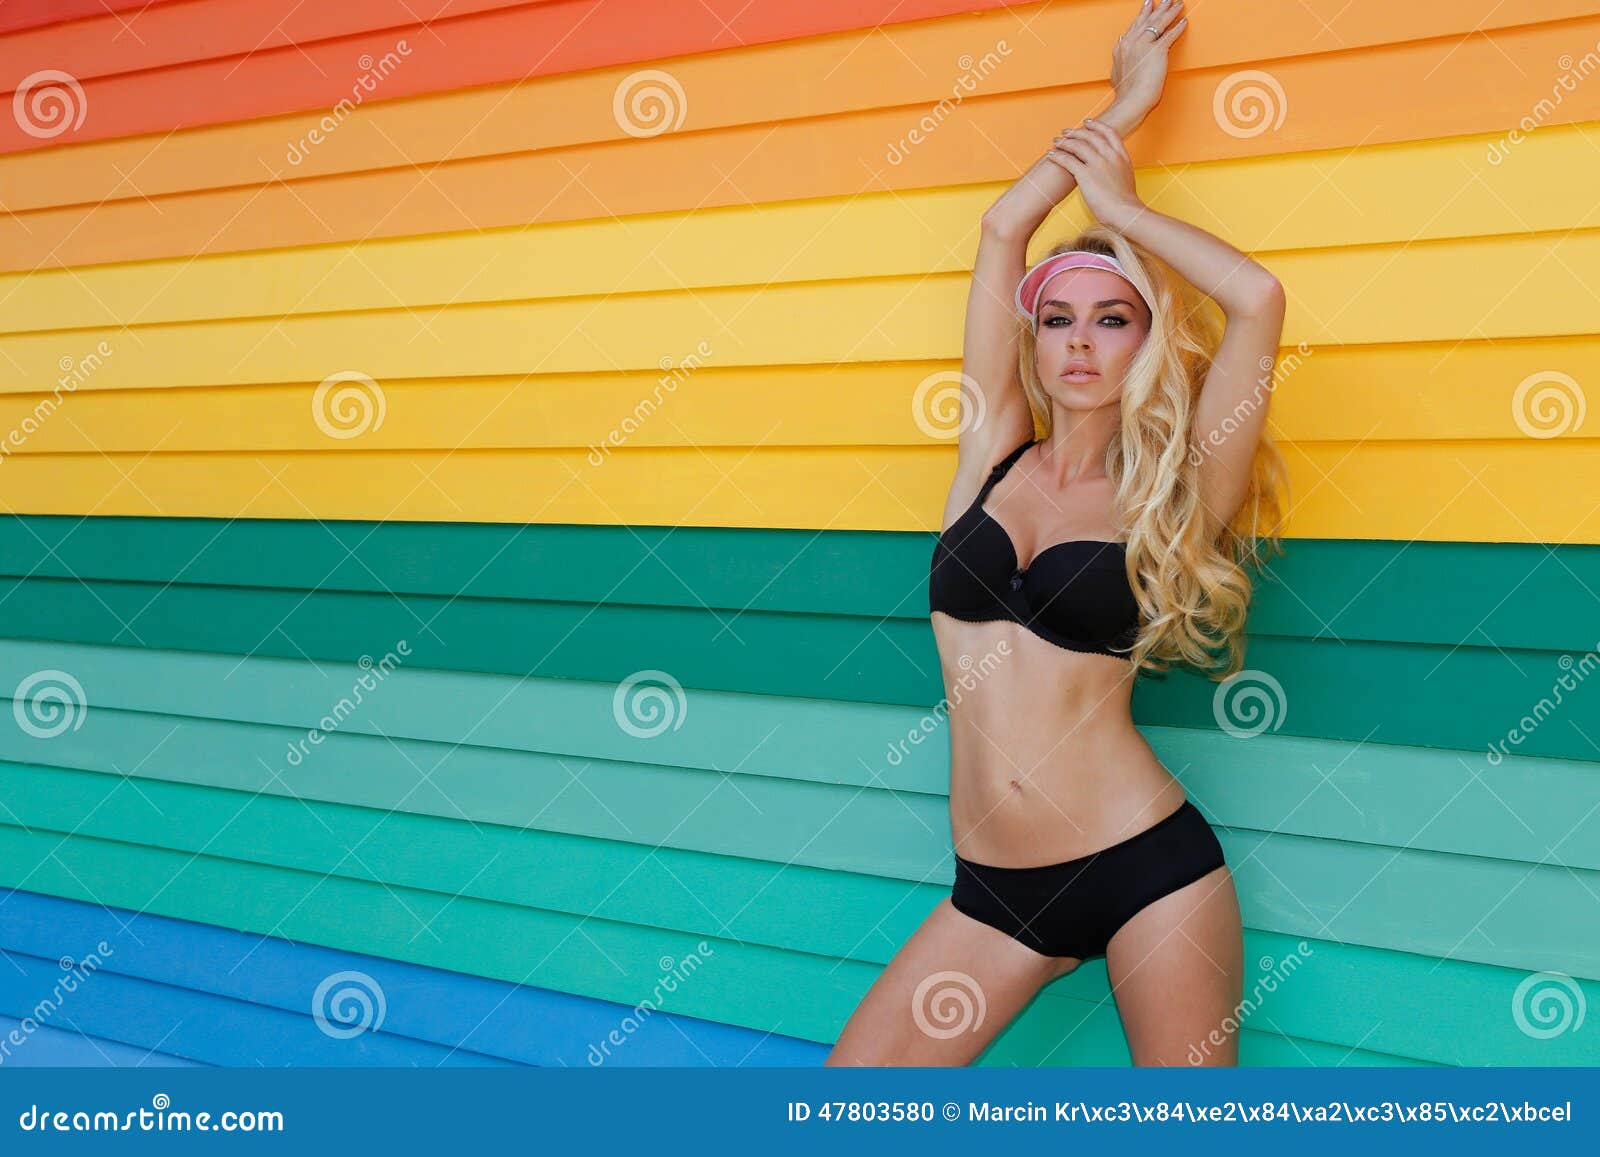 Very Beautiful Woman In The Fantastic Colourful Dress On The Colourful